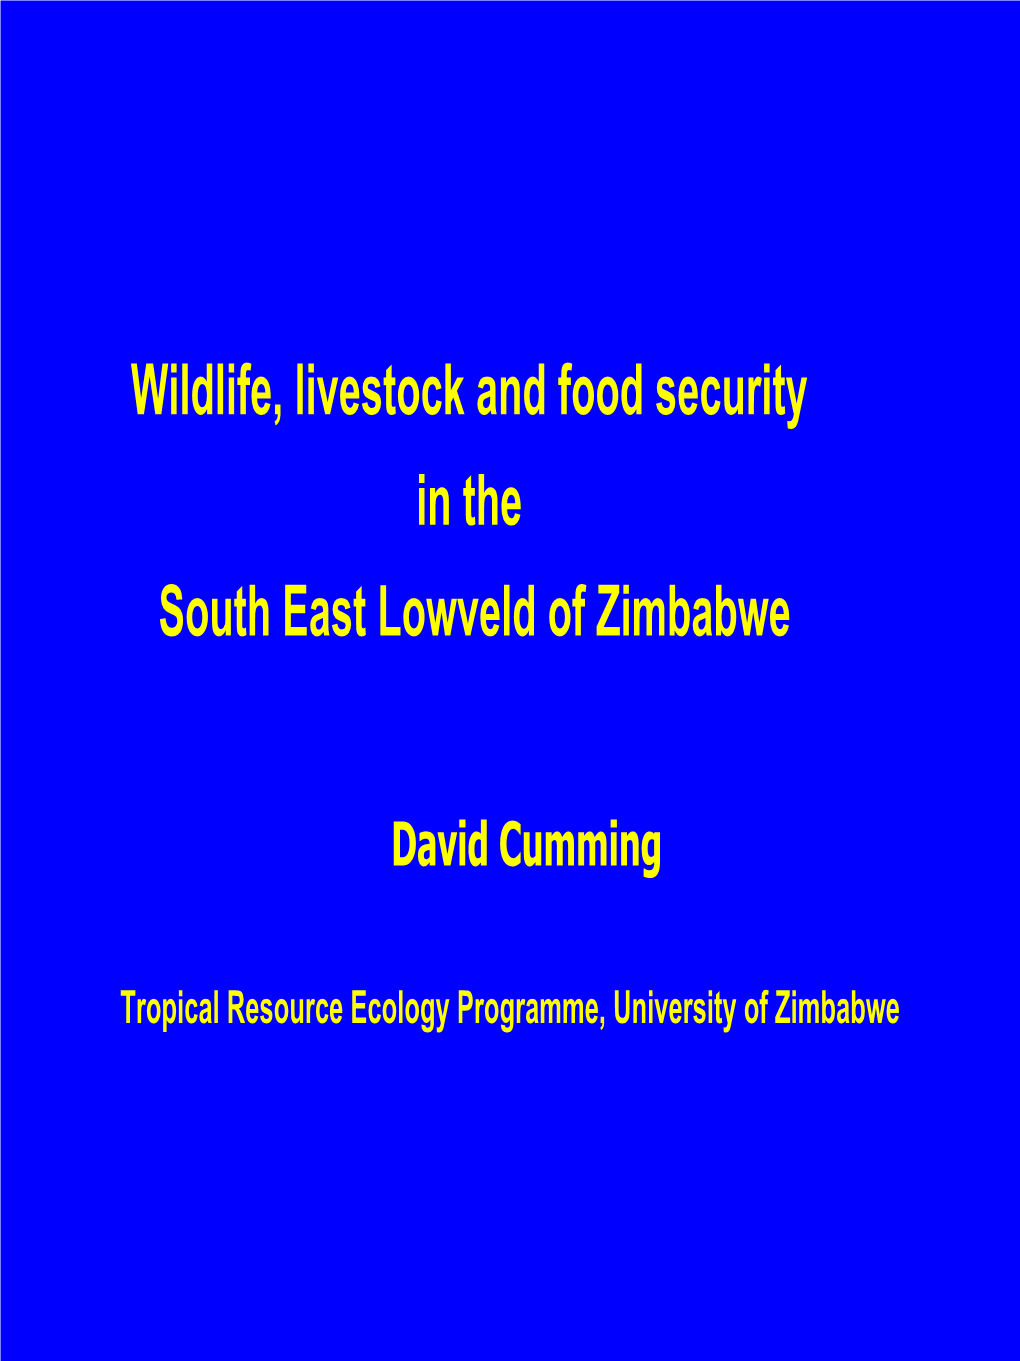 Wildlife, Livestock and Food Security in the South East Lowveld of Zimbabwe